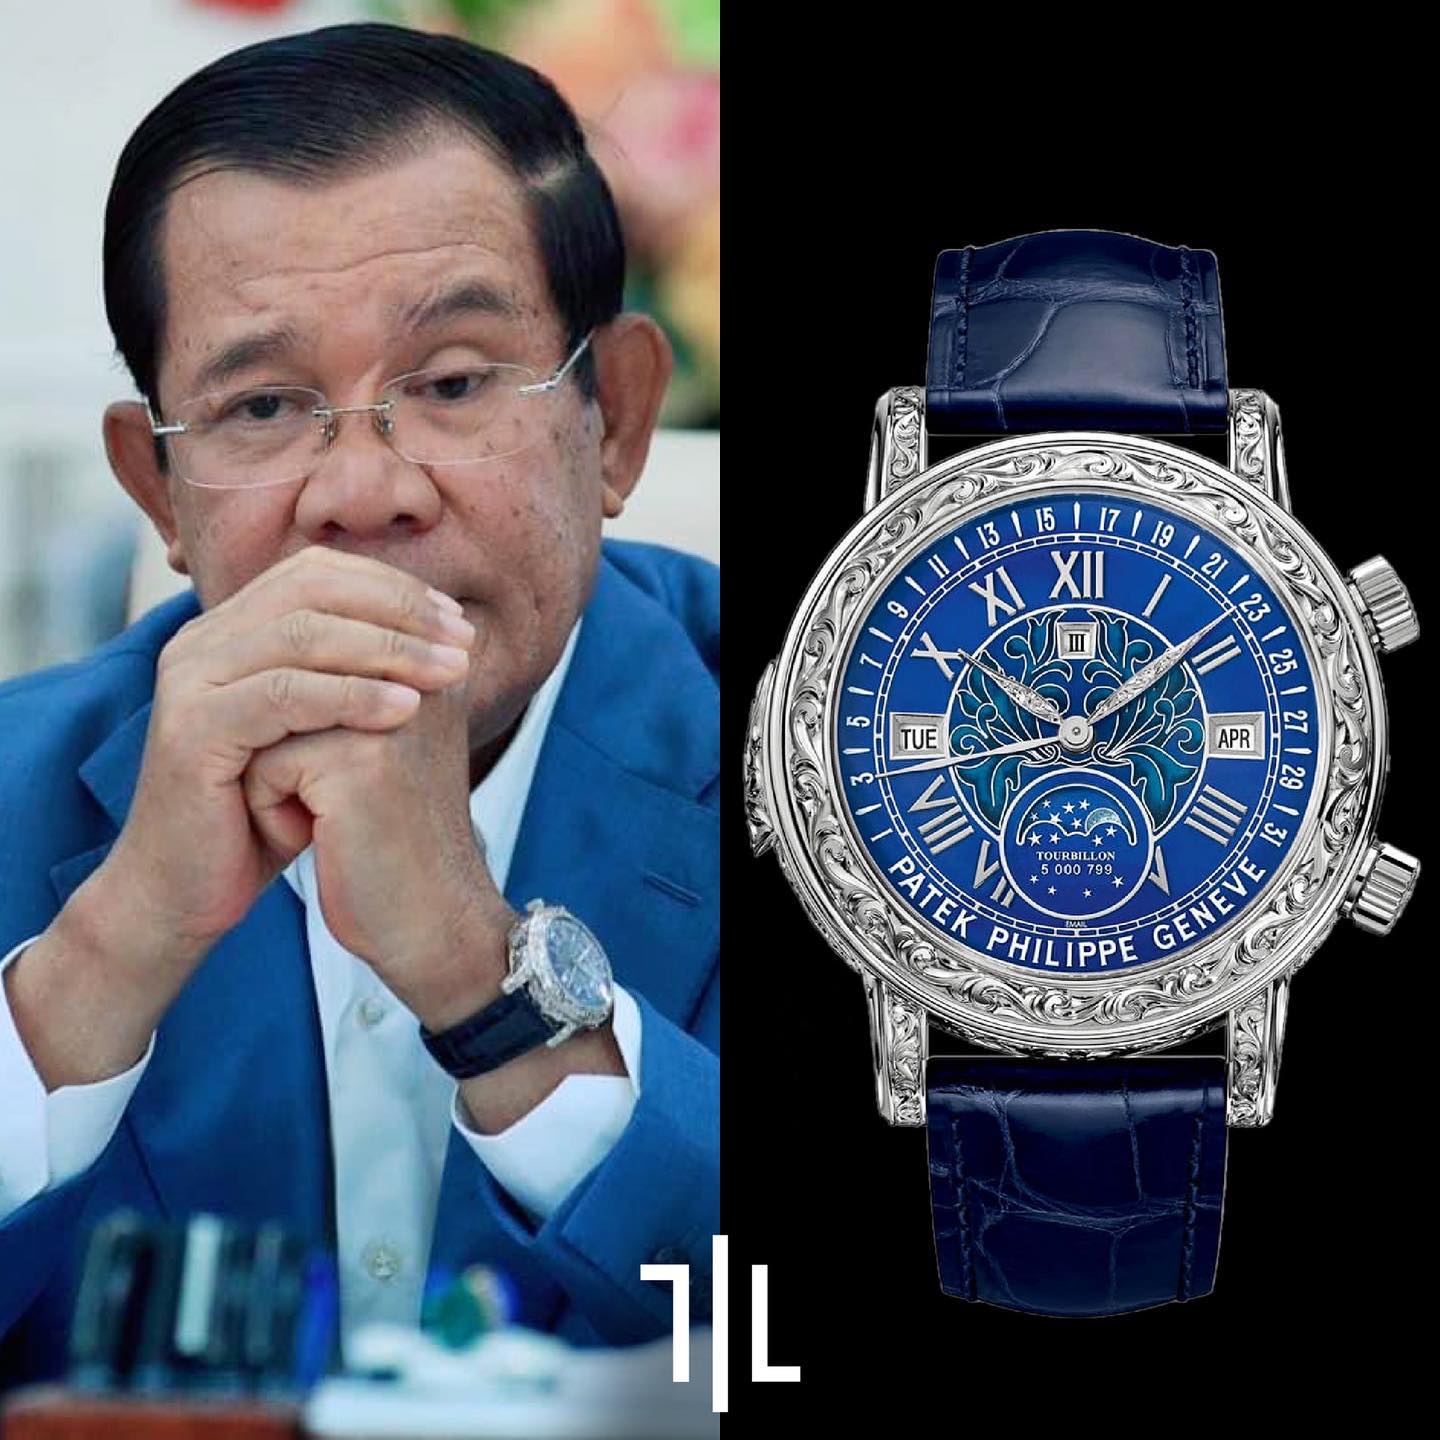 Cambodian Prime Minister watch